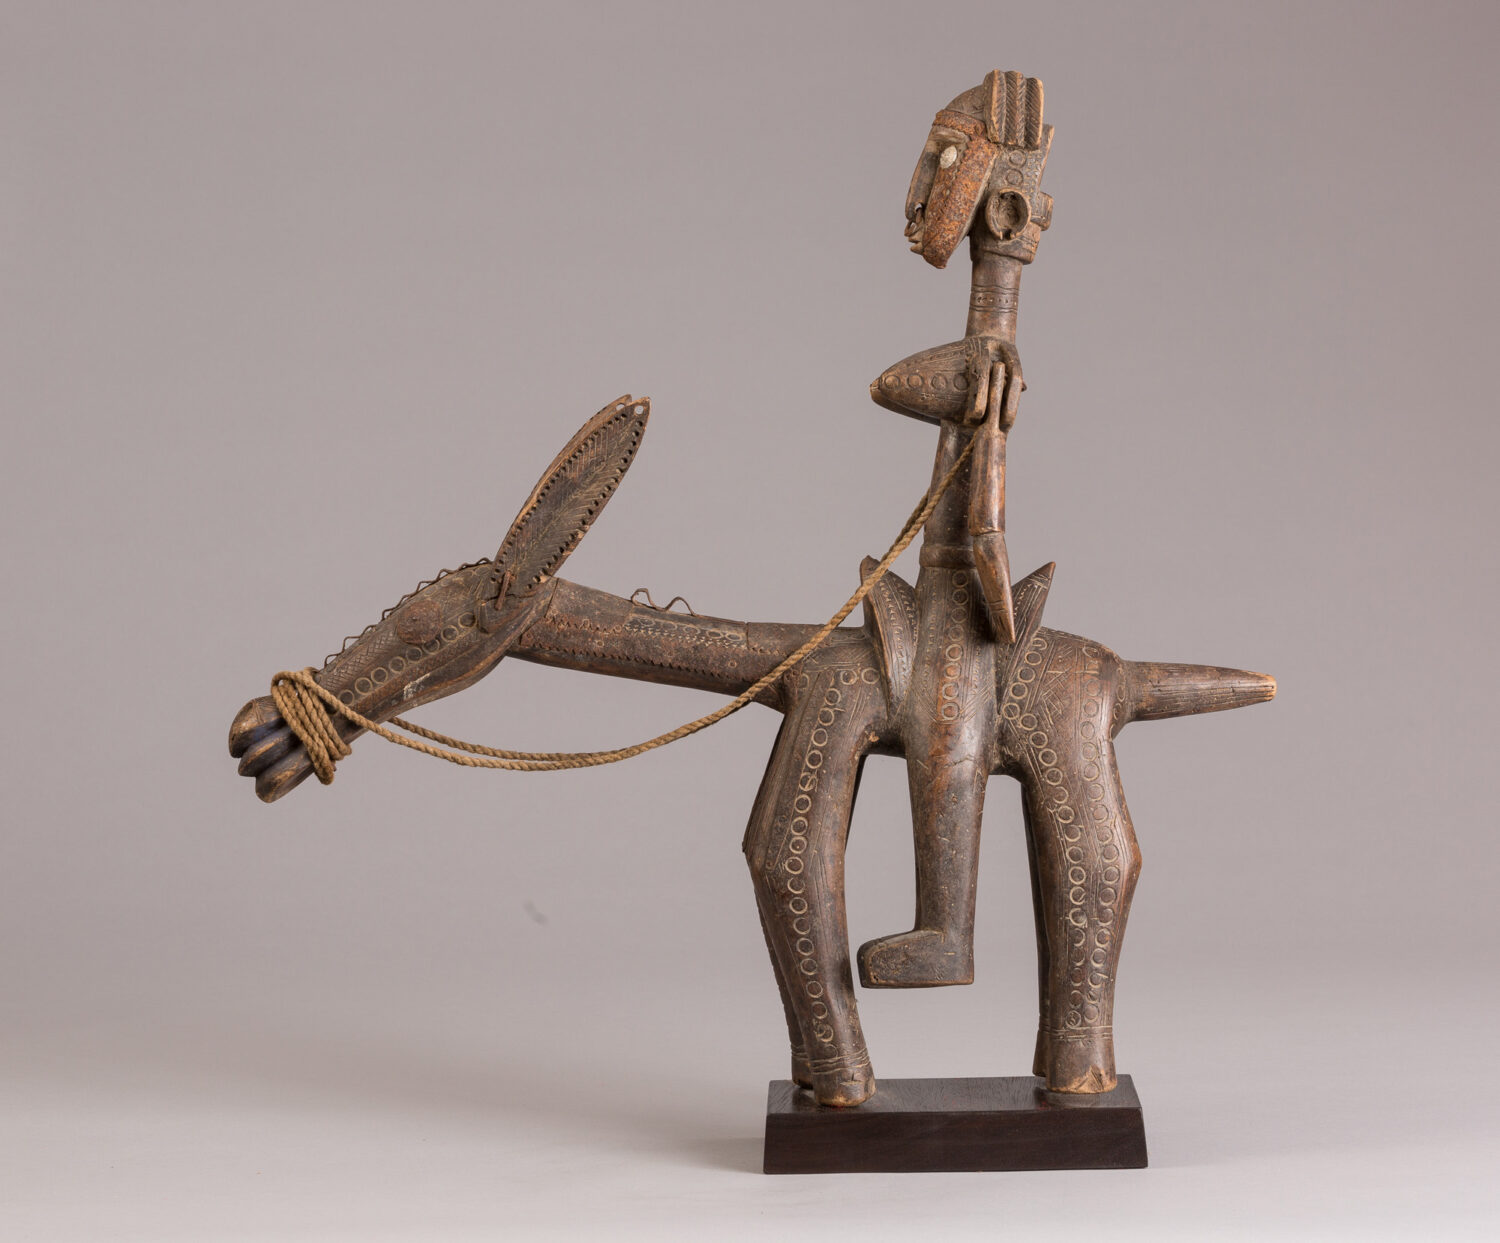 thumbnail of Sculpture of a figure on a donkey made out of wood